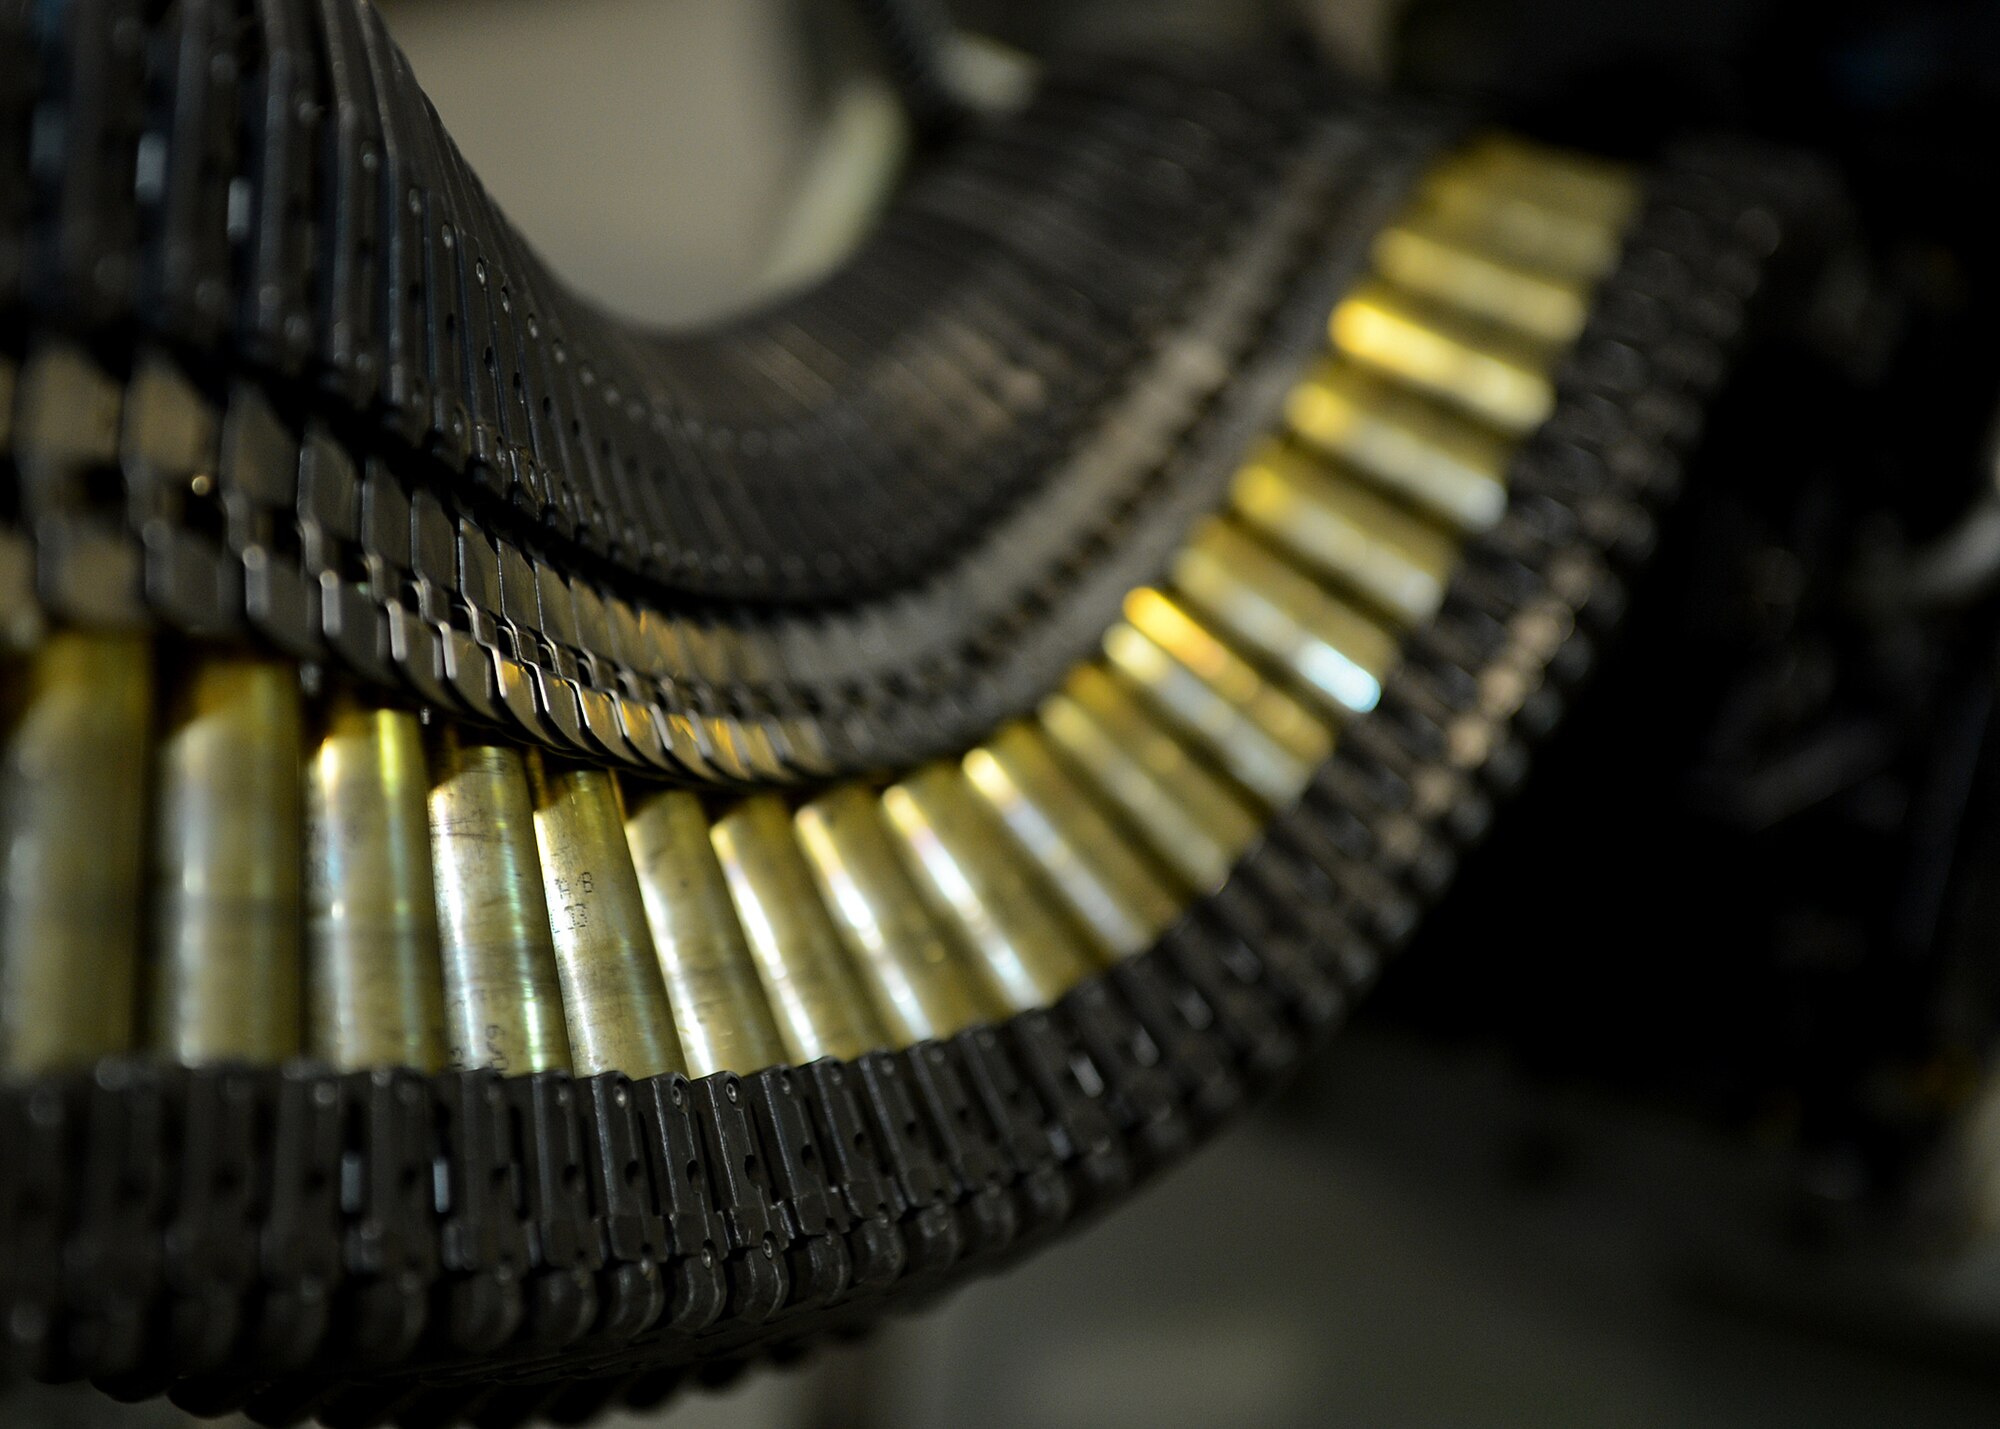 Airmen feed 20 mm target practice rounds into a universal ammunition loading system at Lask Air Base, Poland, June 12, 2014. Ammunition was transferred to the aircraft using the UAL, which can hold approximately 2,100 rounds. The ammo for 18 U.S. Air Force F-16 Fighting Falcon fighter aircraft, from Spangdahlem Air Base, Germany, was used during Polish-led EAGLE TALON and U.S. Navy-led BALTOPS 14 to train pilots for future close-air-support missions. (U.S. Air Force photo by Airman 1st Class Kyle Gese/Released)